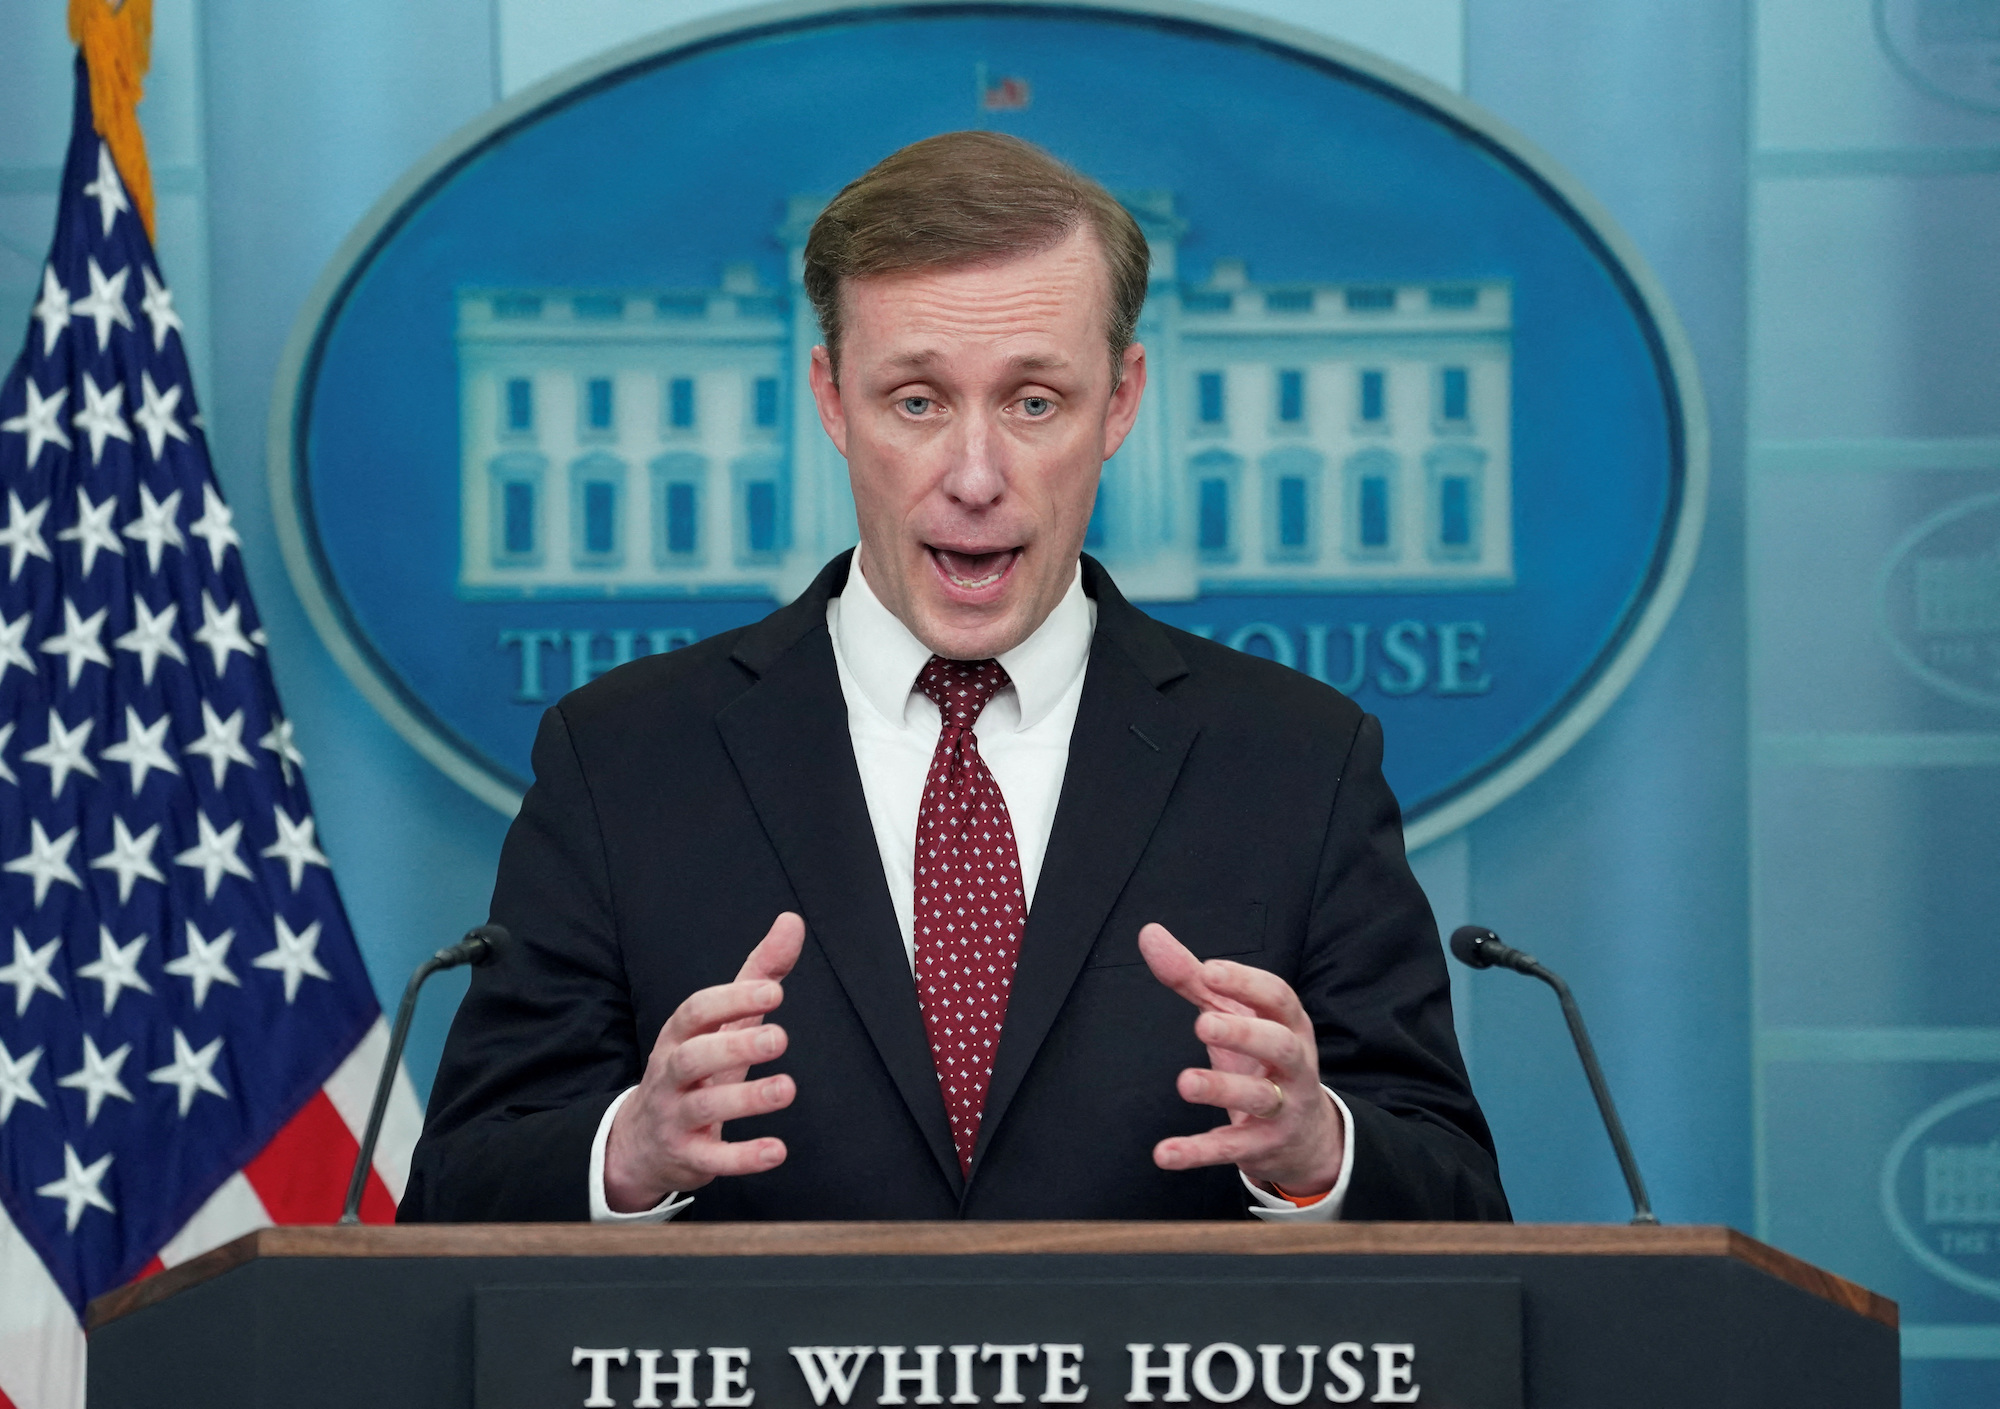 White House national security adviser Jake Sullivan speaks during a press conference at the White House on December 4.